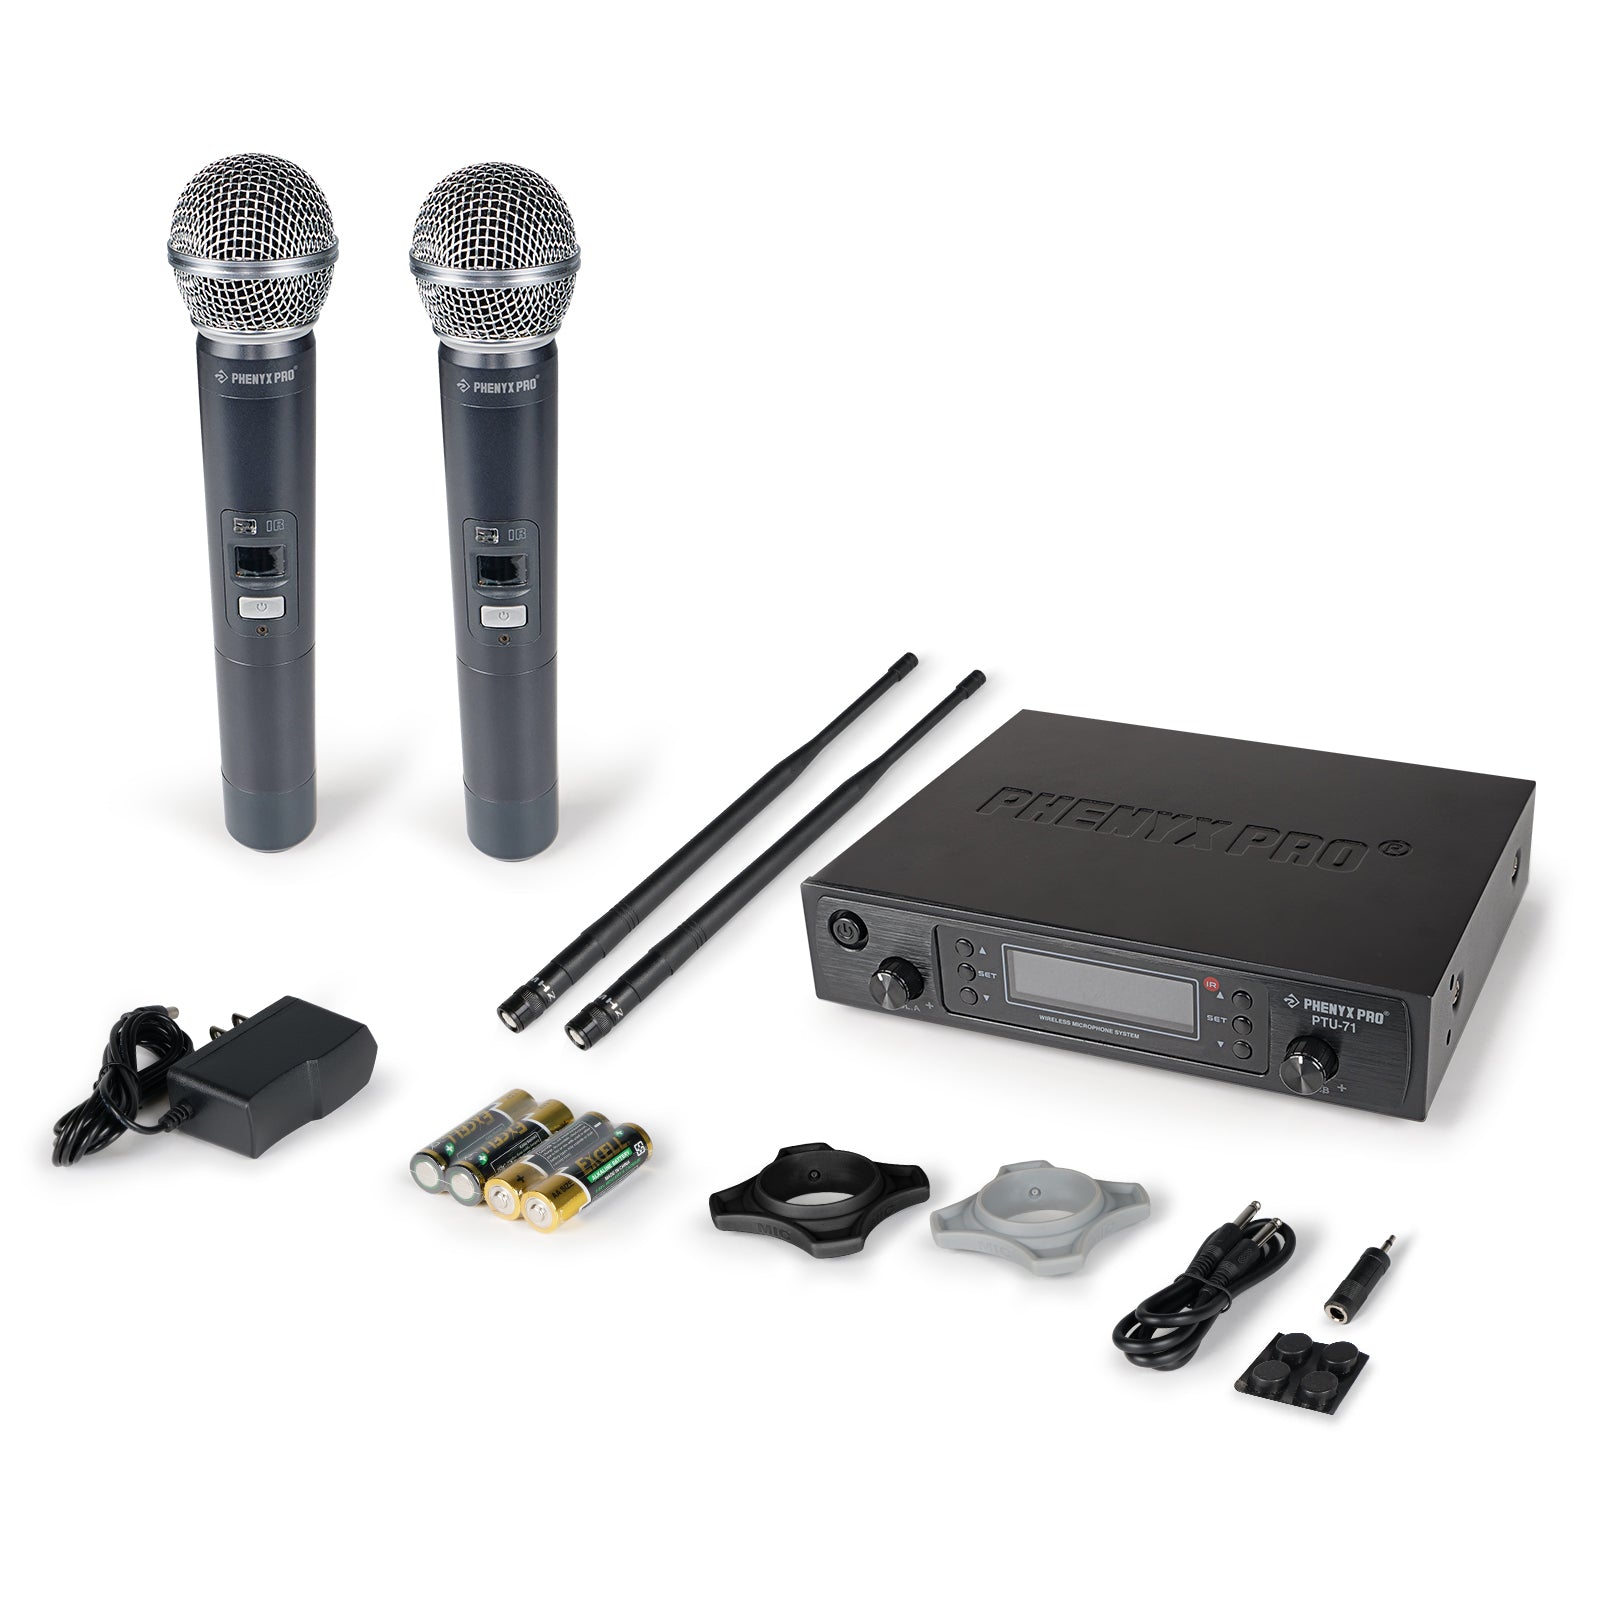 Phenyx Pro PTU-71A Dual Handheld UHF Wireless Microphone System, come with 2 handheld mics and microphone anti-rolling rings